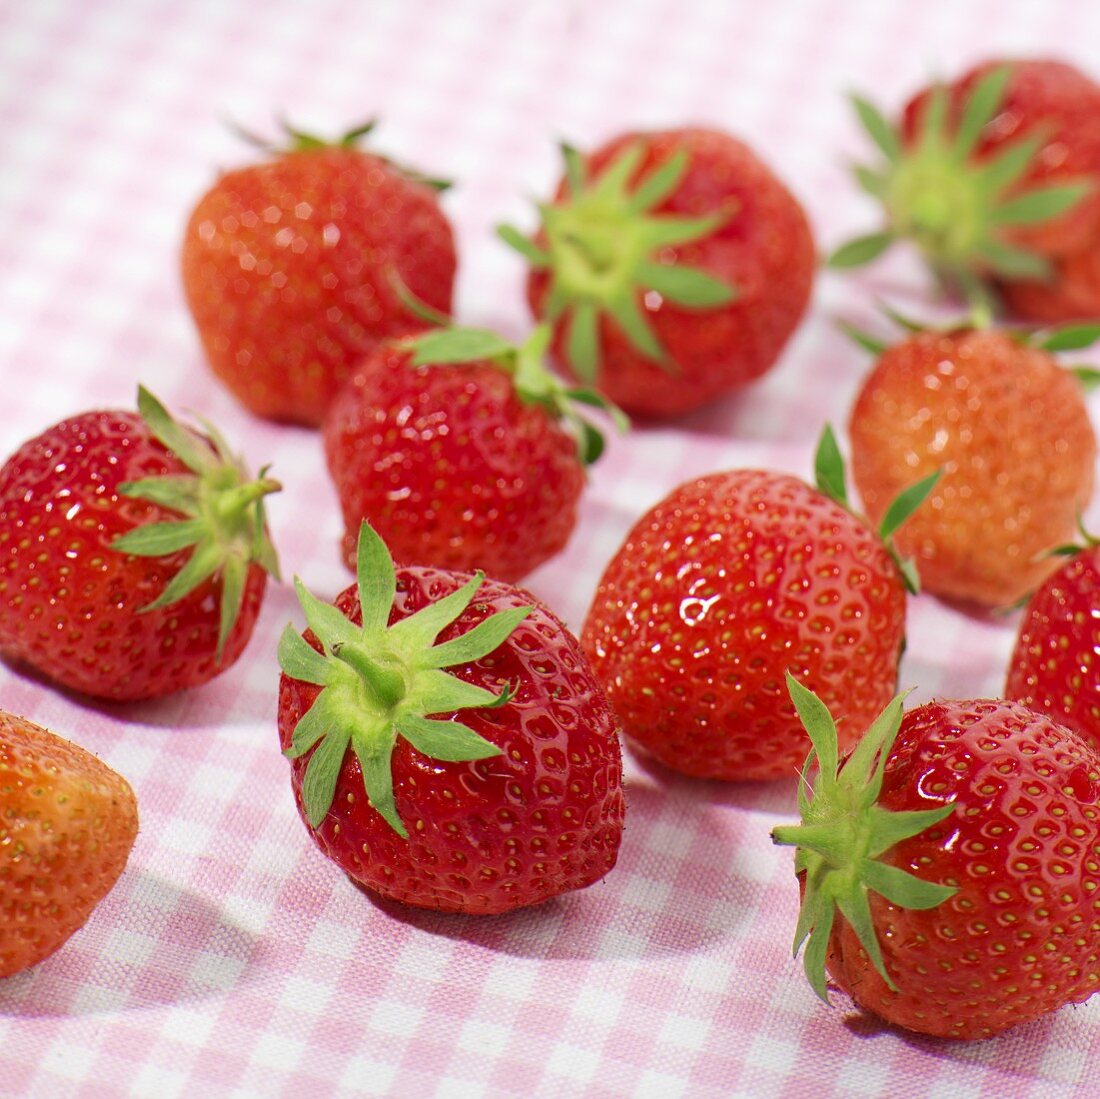 Strawberries on checked tablecloth